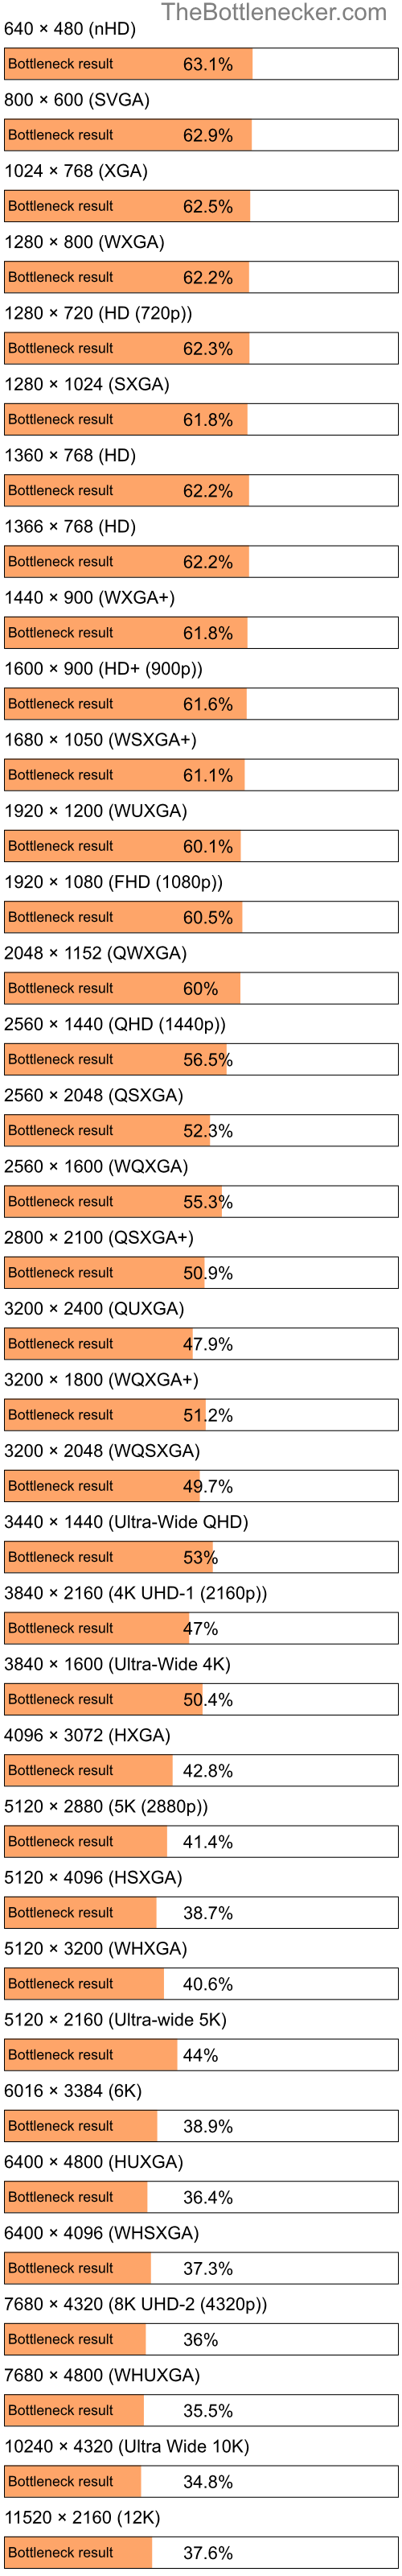 Bottleneck results by resolution for Intel Core2 Quad Q9500 and NVIDIA GeForce RTX 3060 Ti in Graphic Card Intense Tasks